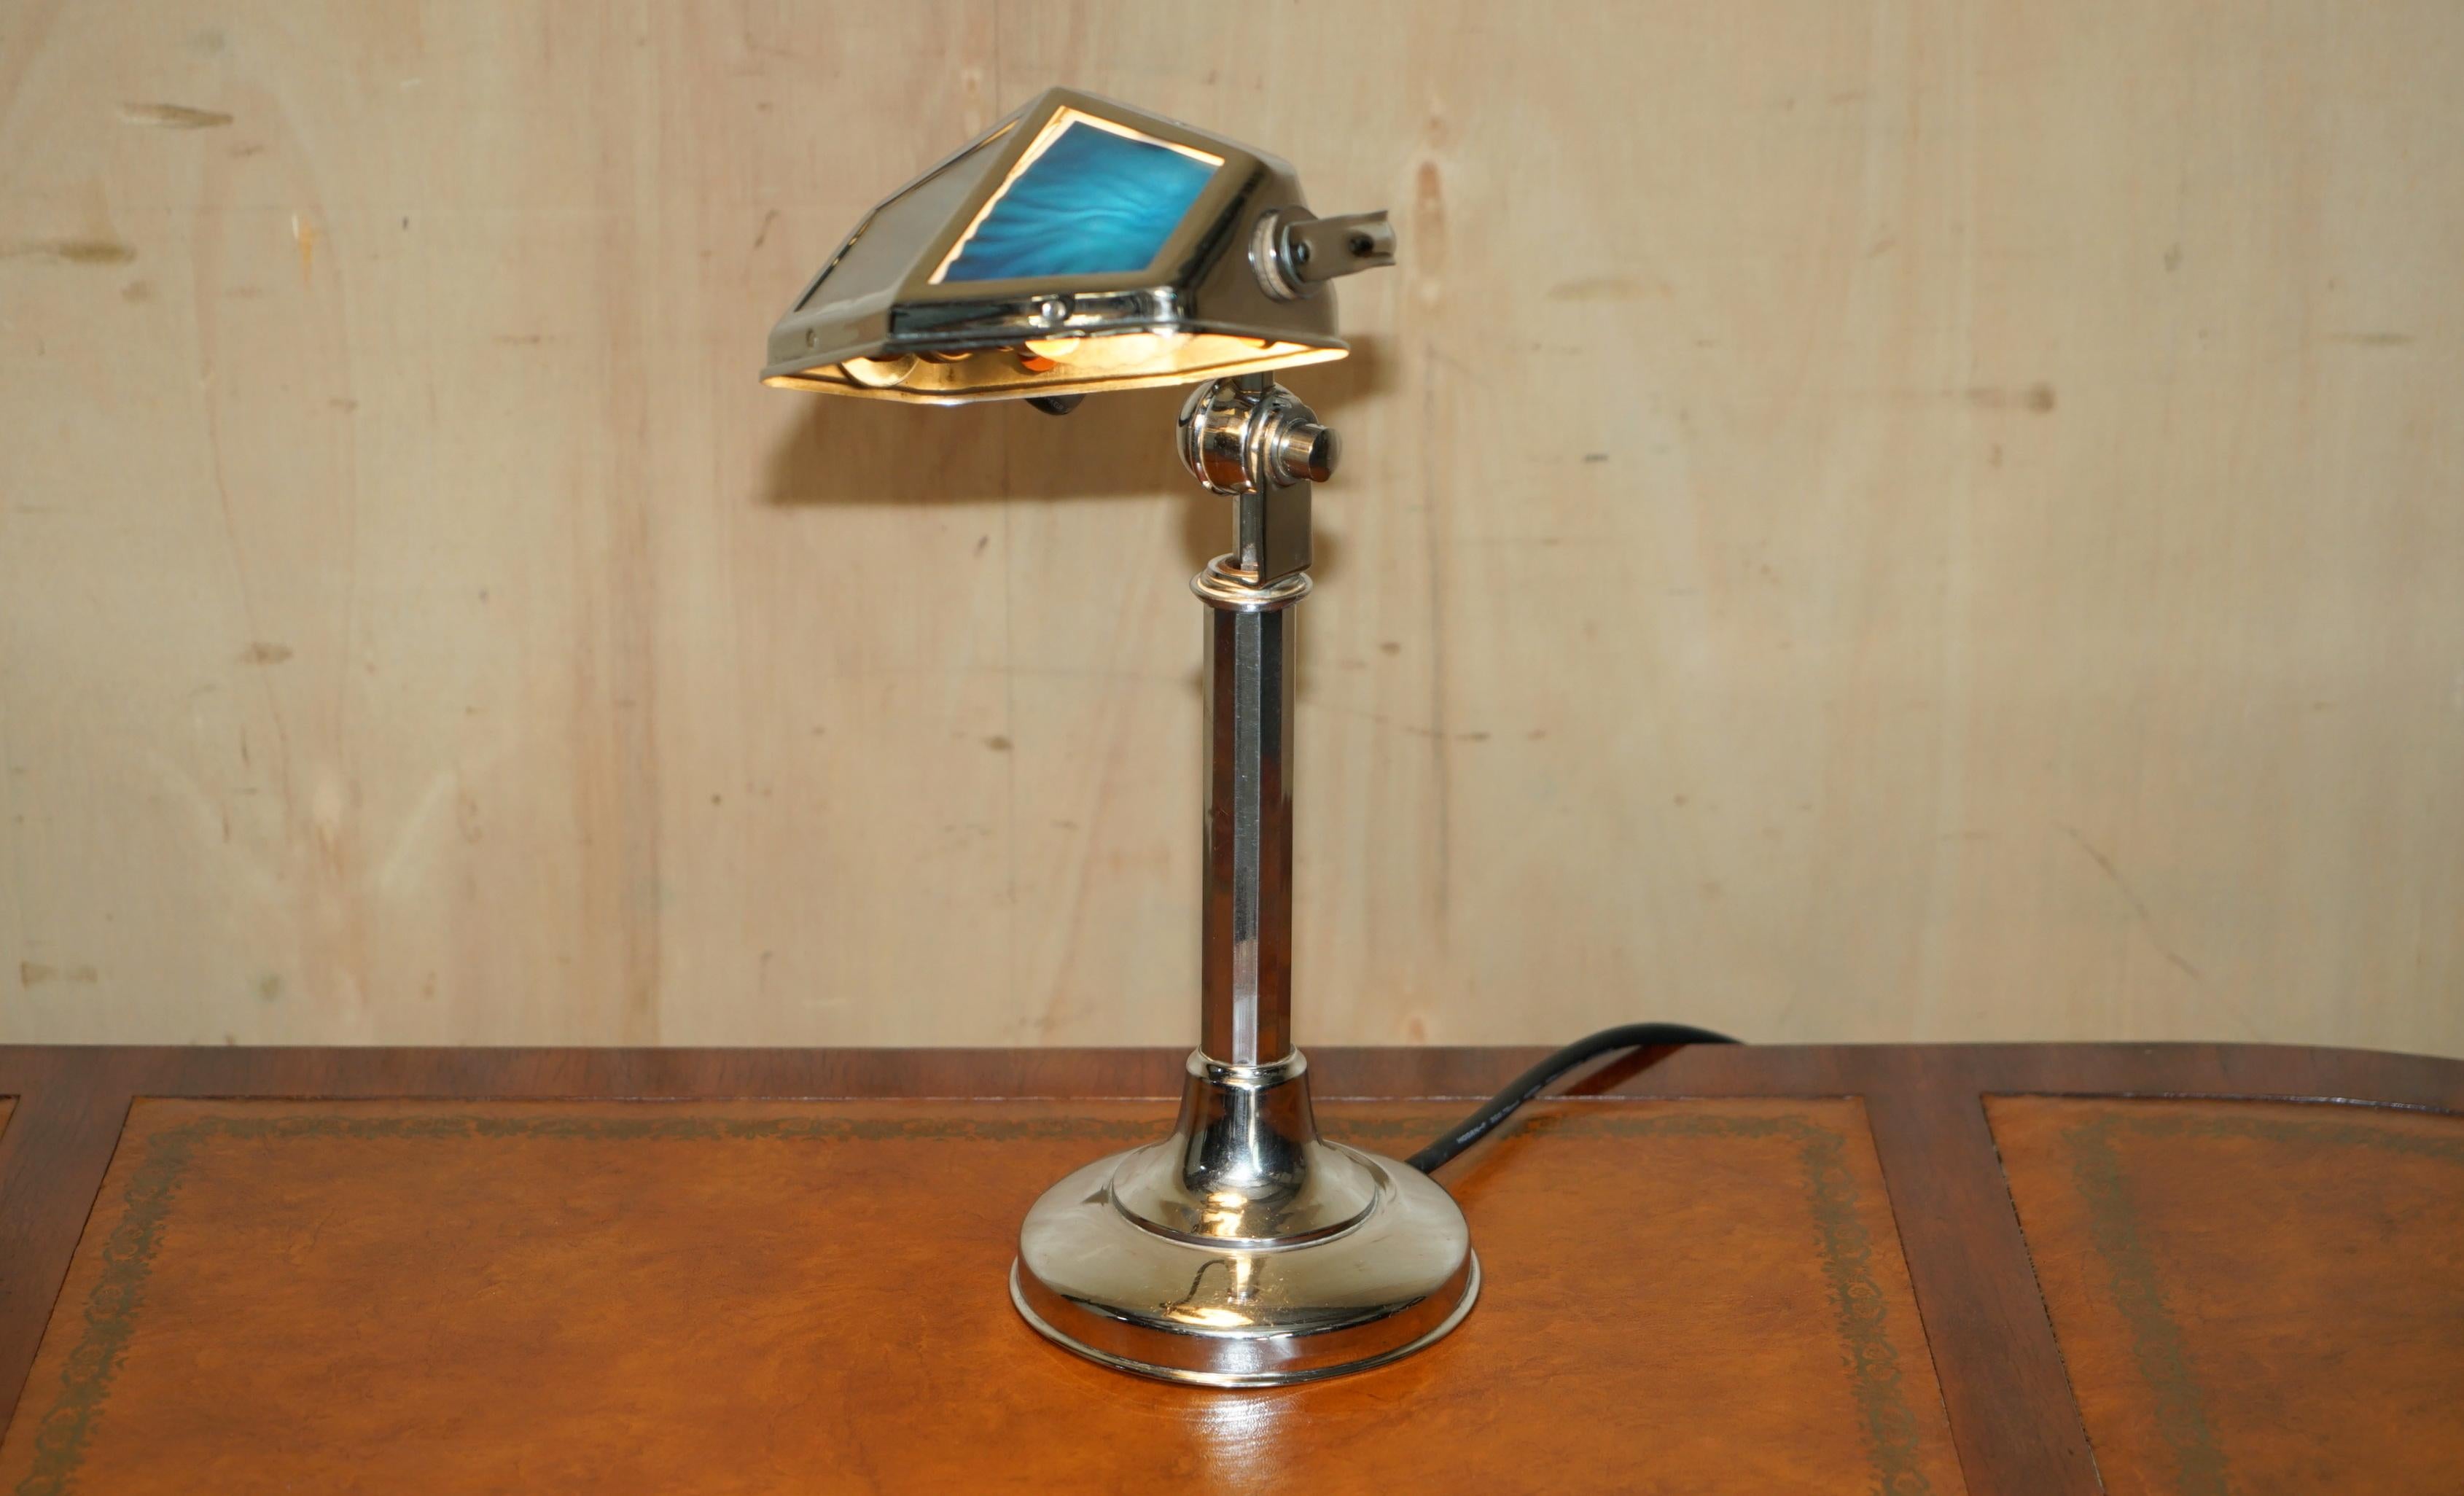 Royal House Antiques

Royal House Antiques is delighted to offer for sale this highly collectable, totally original, fully restored 1930's Art Deco polished Chrome Jean Chavanis designed for Pirouette, articulated table lamp

Please note the